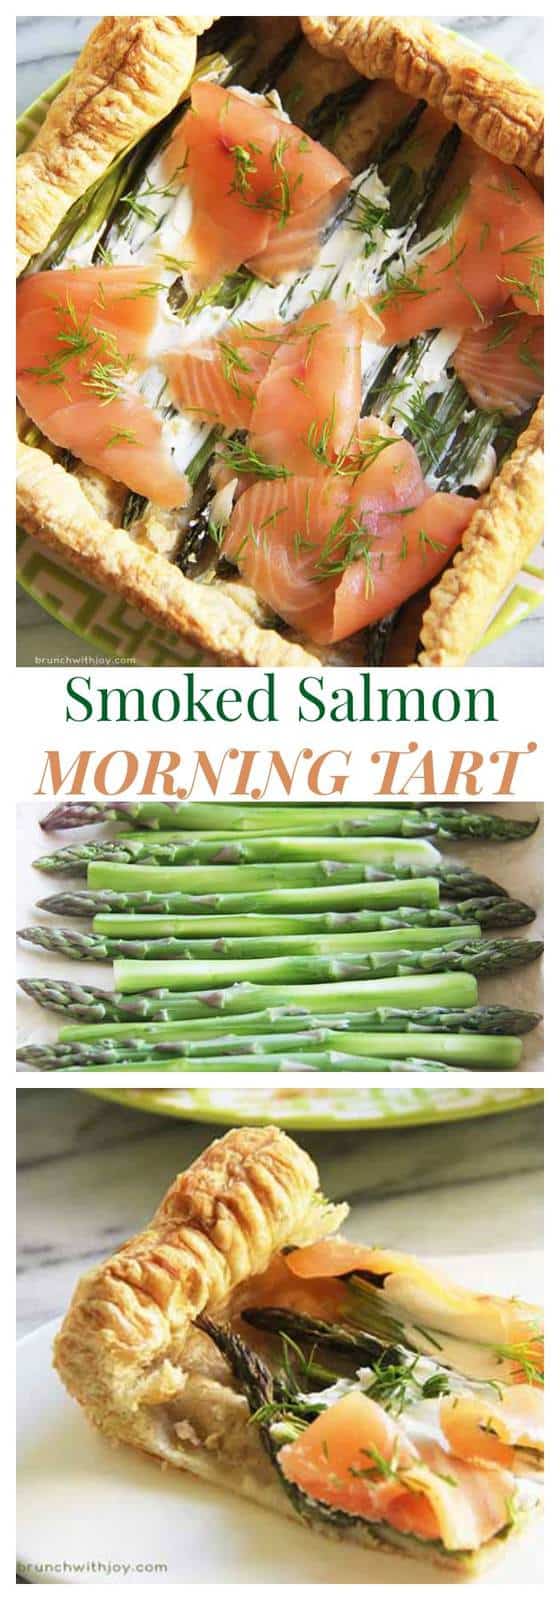 Smoked Salmon Tart - a simple but elegant and delicious addition to a special breakfast or brunch. | www.brunchwithjoy.com for cupcakesandkalechips.com